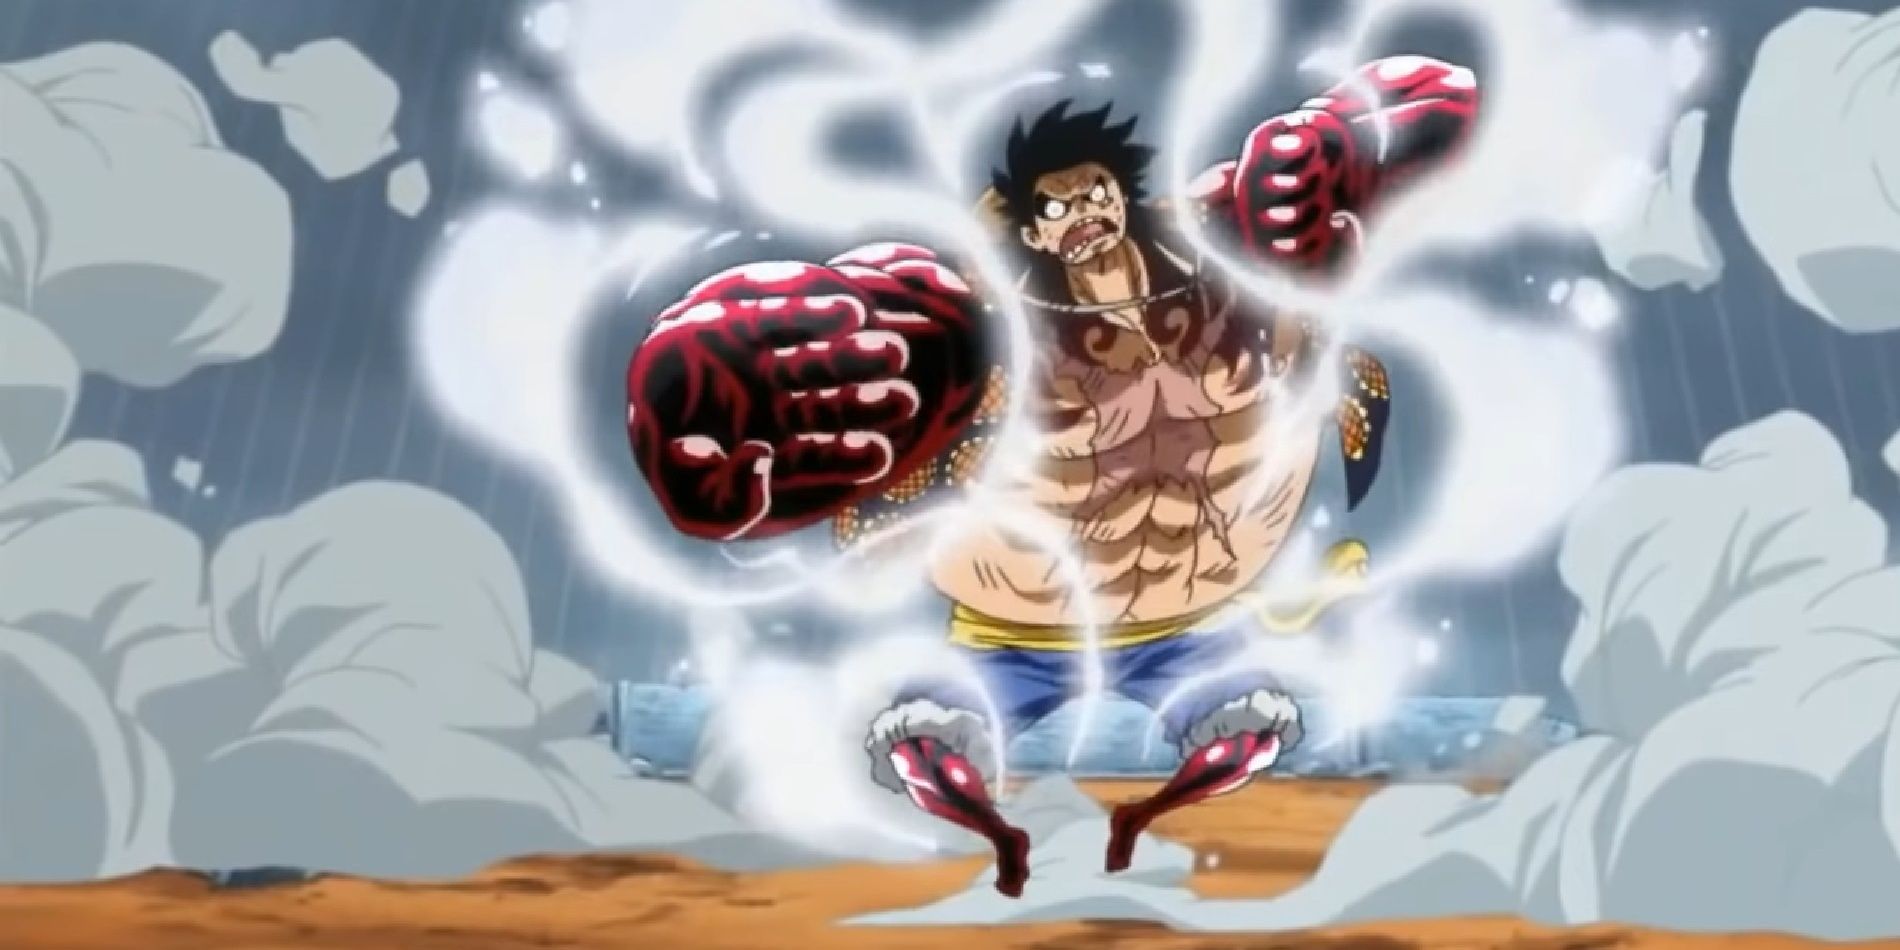 Gear Fourth Bounce Man being used by Monkey D. Luffy against Donquixote Doflamingo in One Piece's Dressrosa Arc